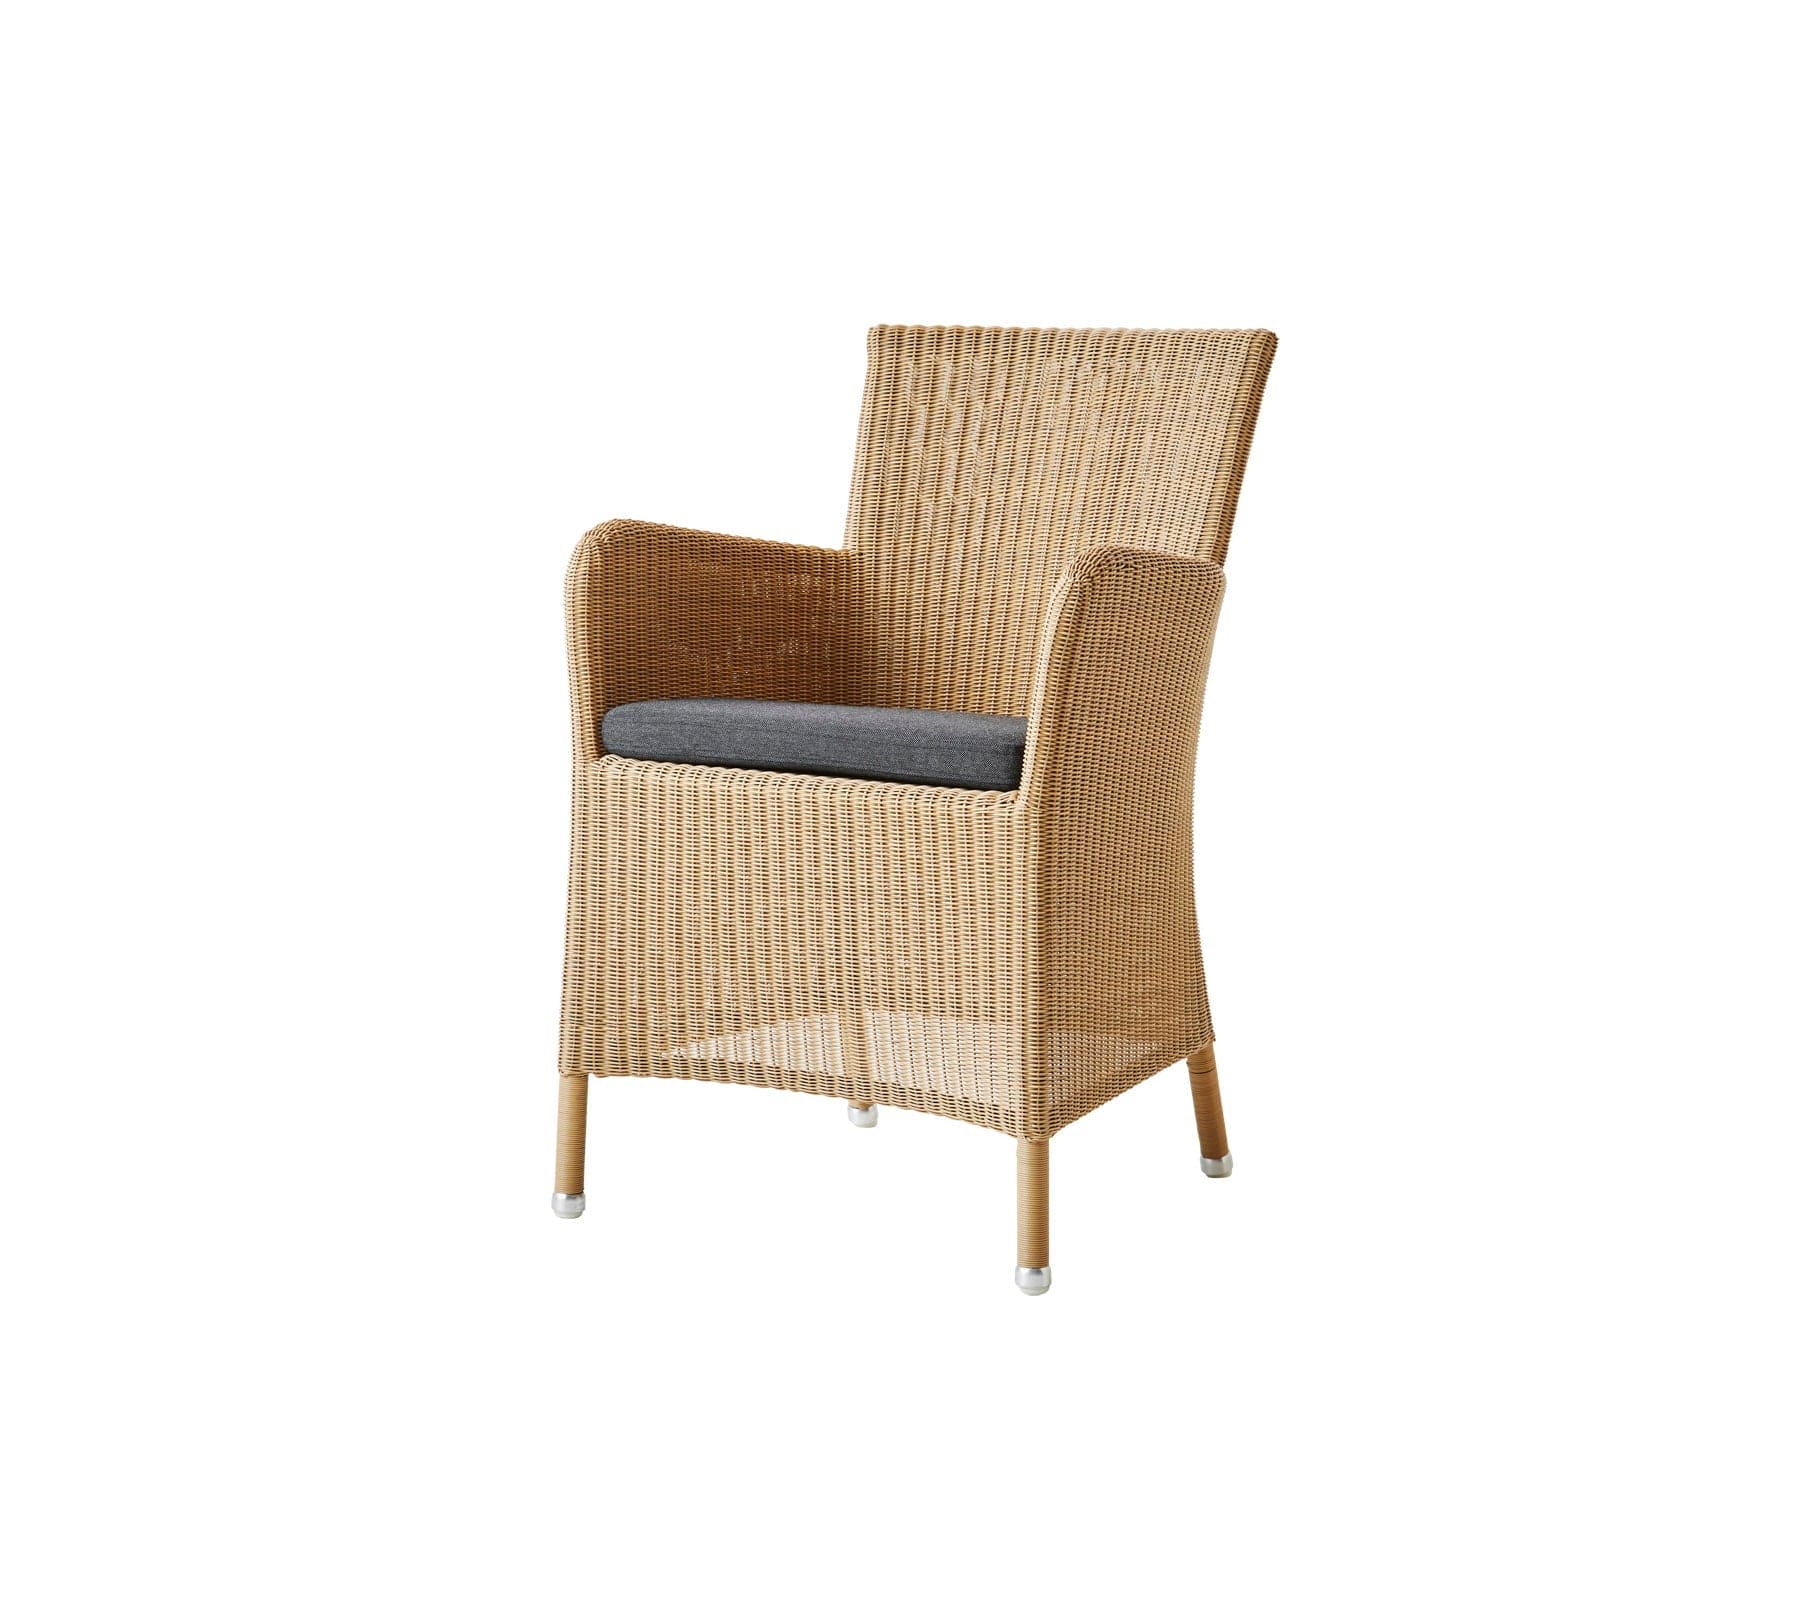 Boxhill's Hampsted Outdoor Dining Armchair Natural Weave with Black Cushion